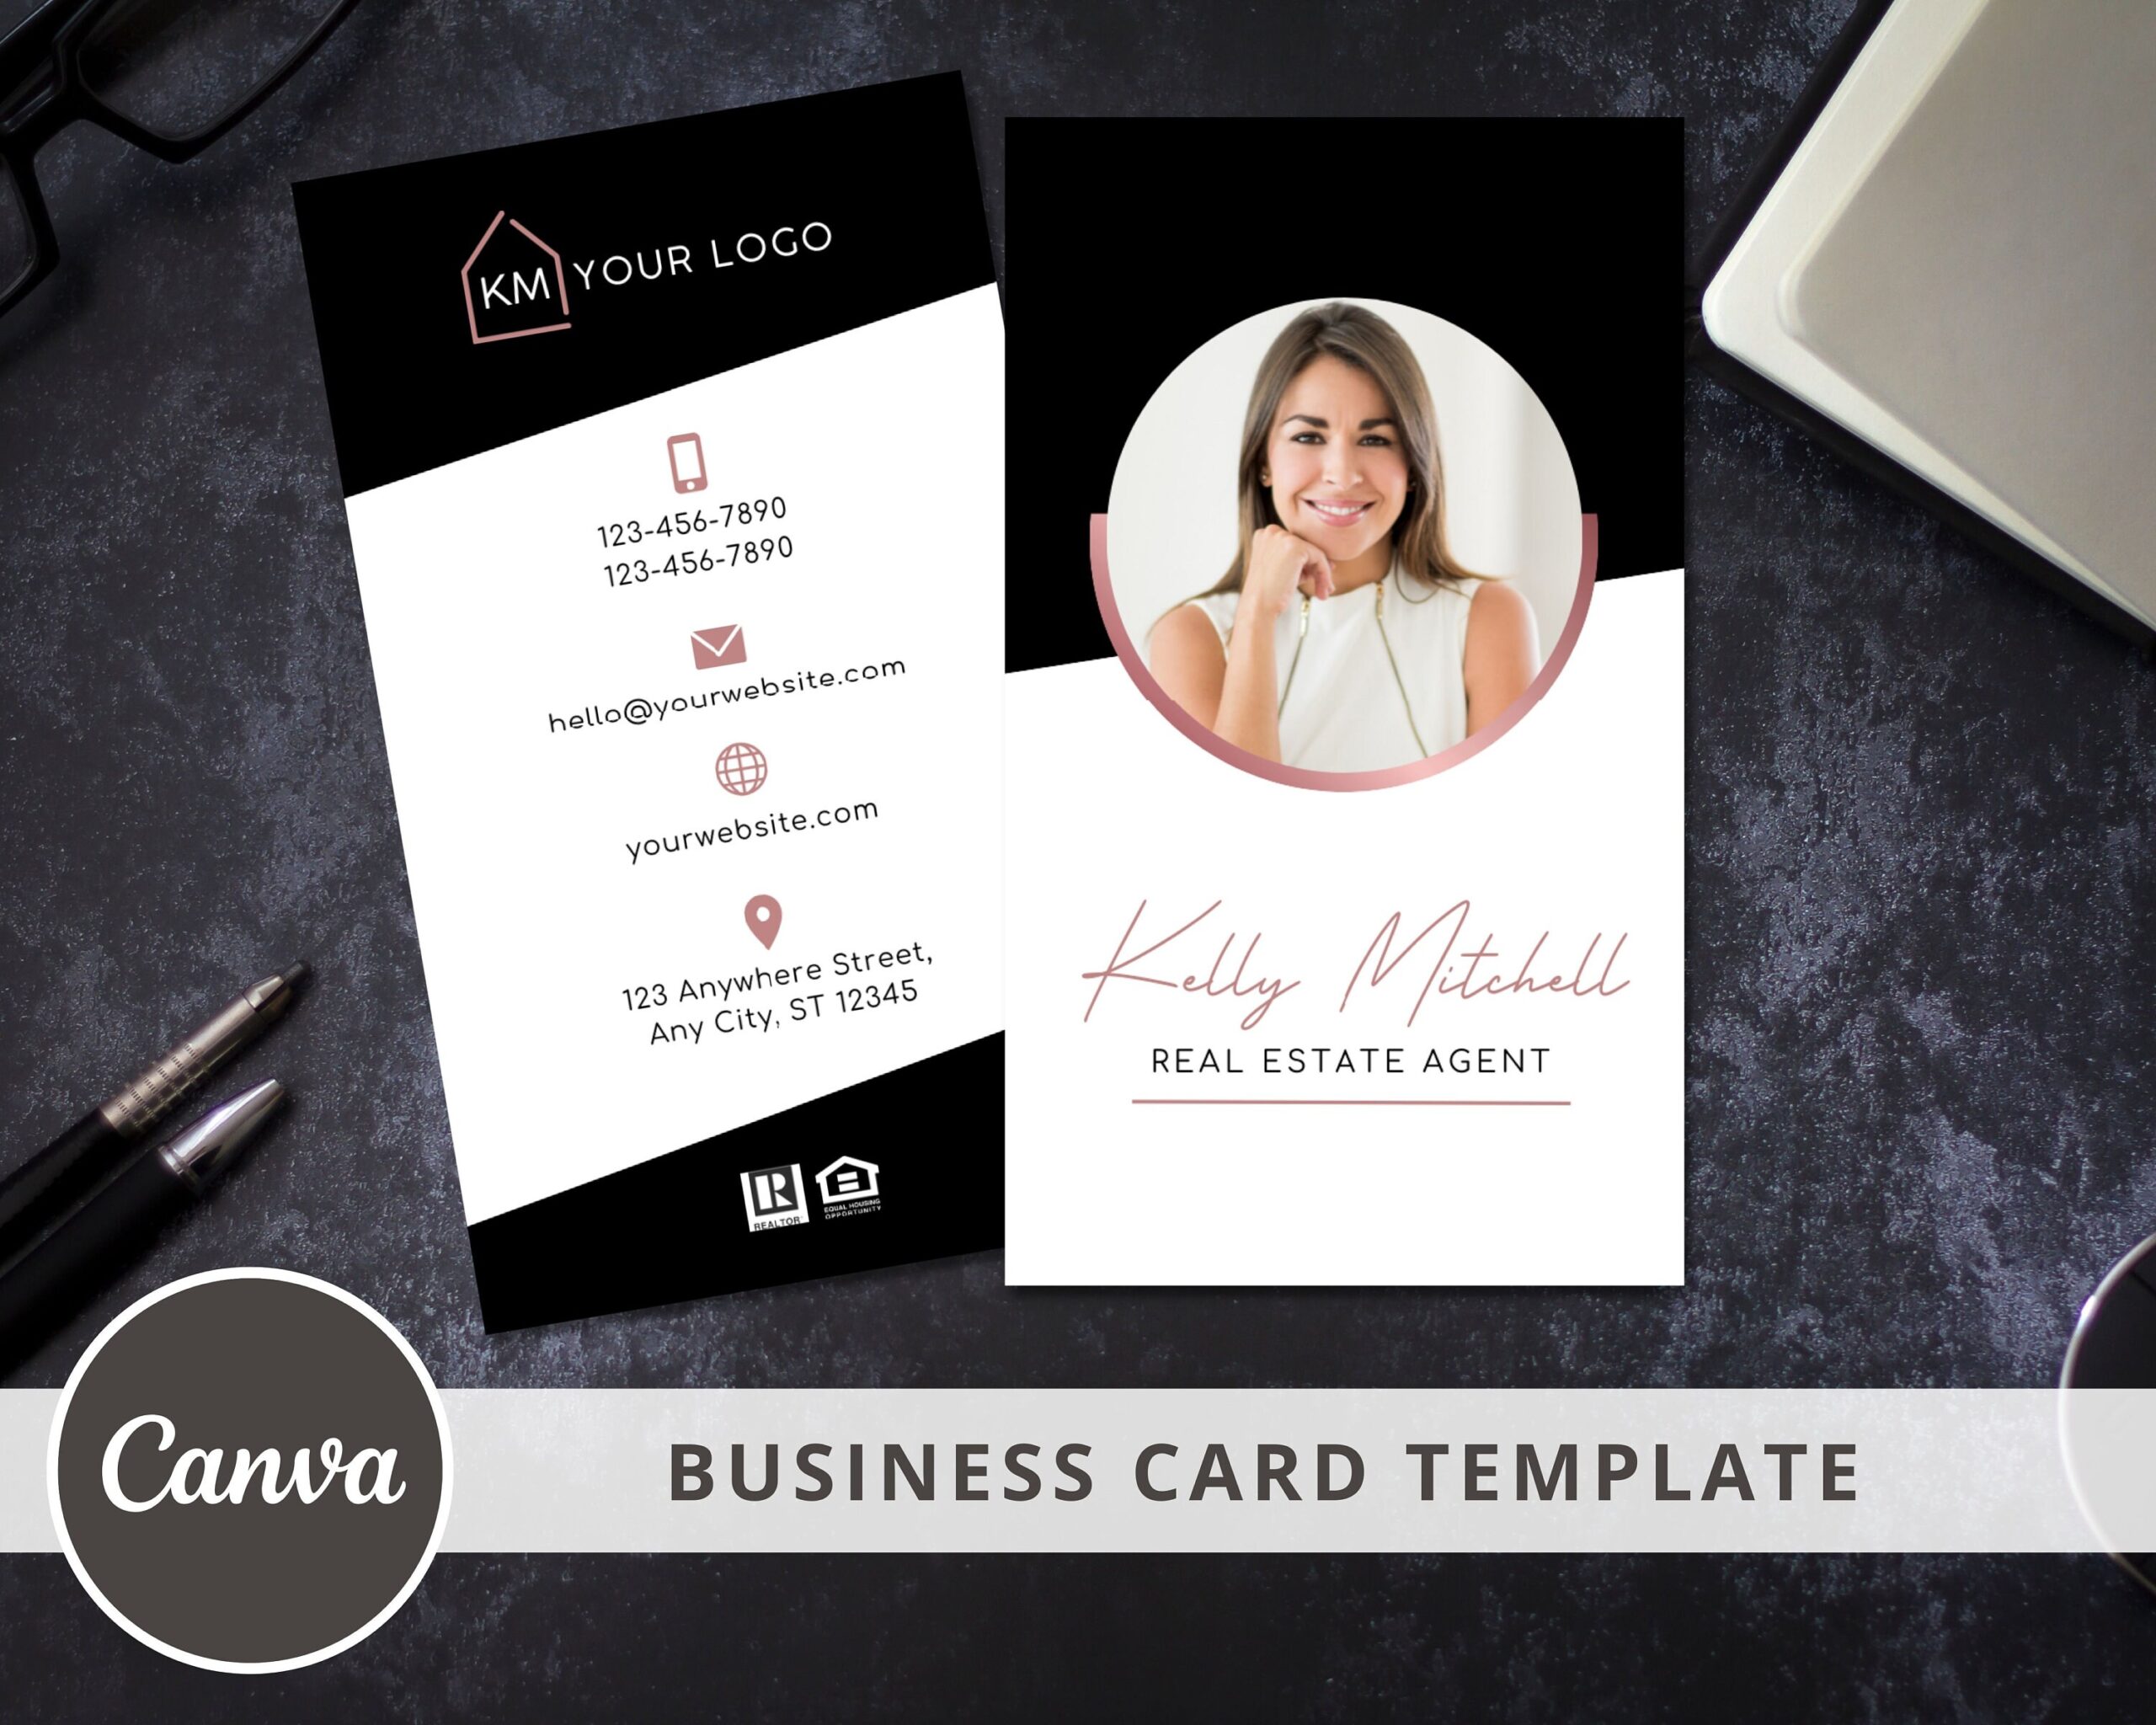 Vertical Business Card Template for Feminine Real Estate Agents - Canva Editable Template - Print-Ready Card Template - Instant Access PDF